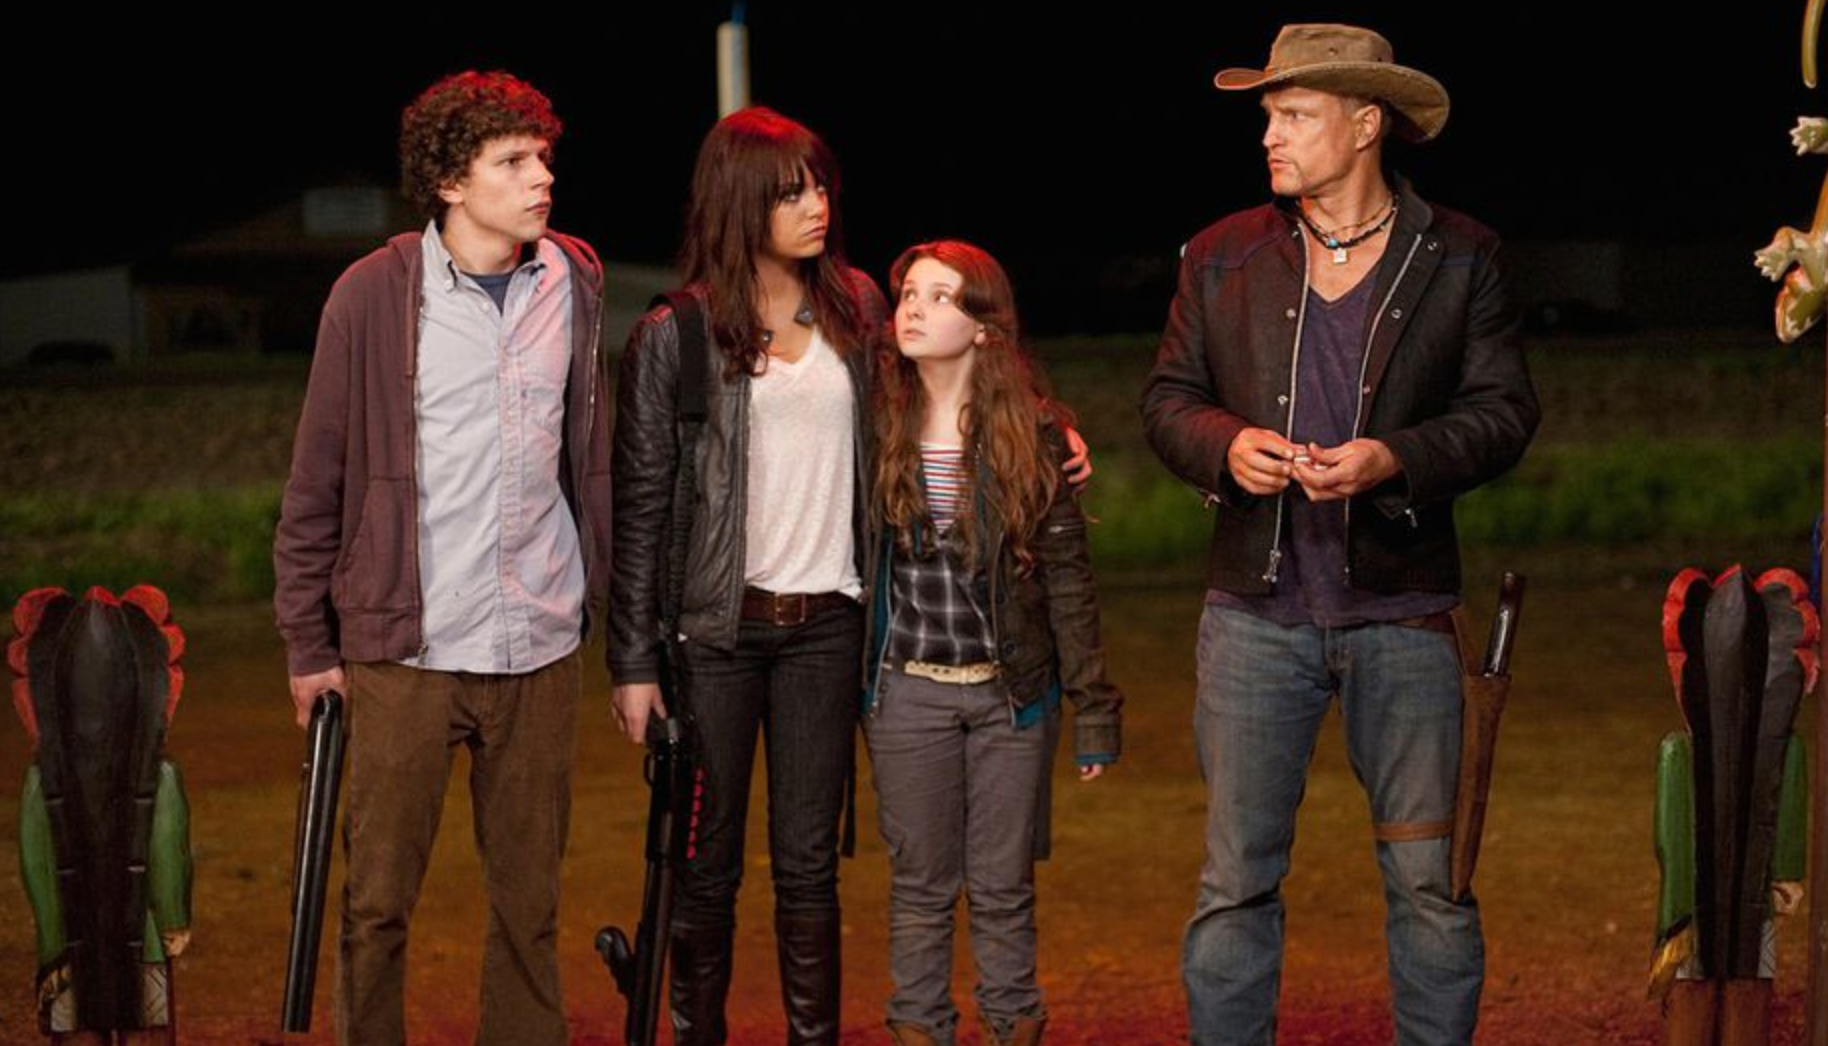 Zombieland: Double Tap - Side by Side Cast Comparison With